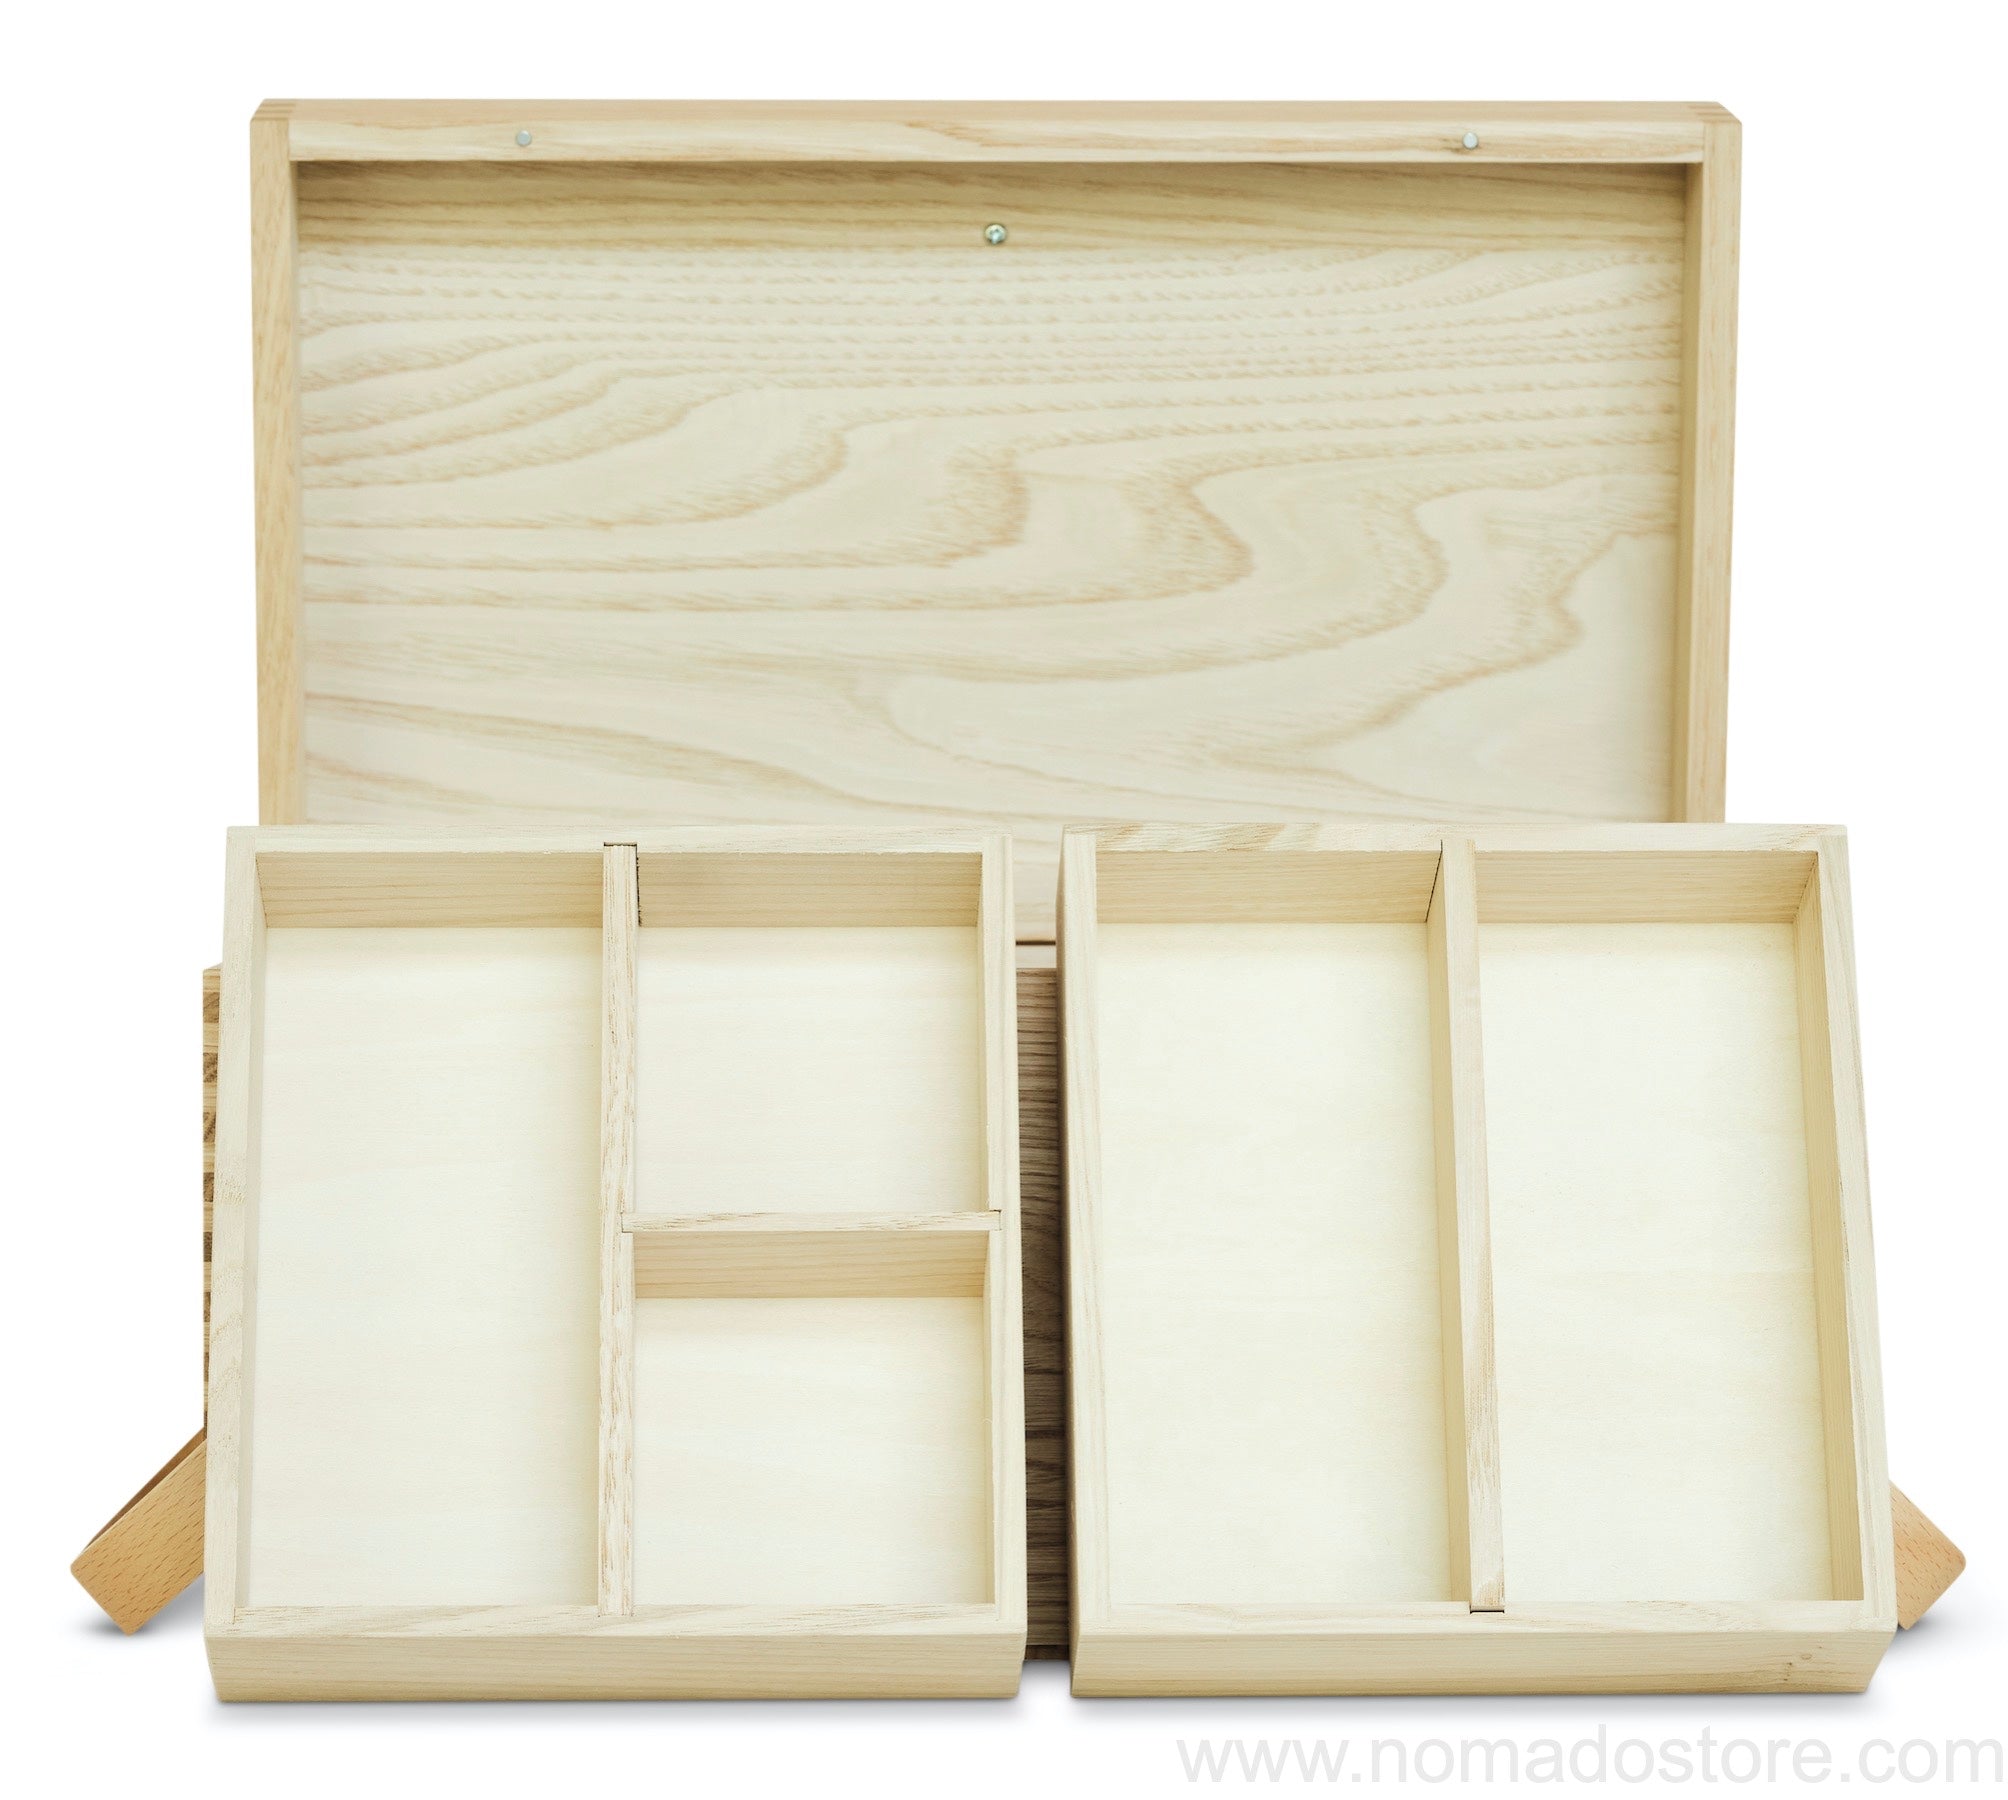 Classiky Chestnut Sewing Box 17102-01